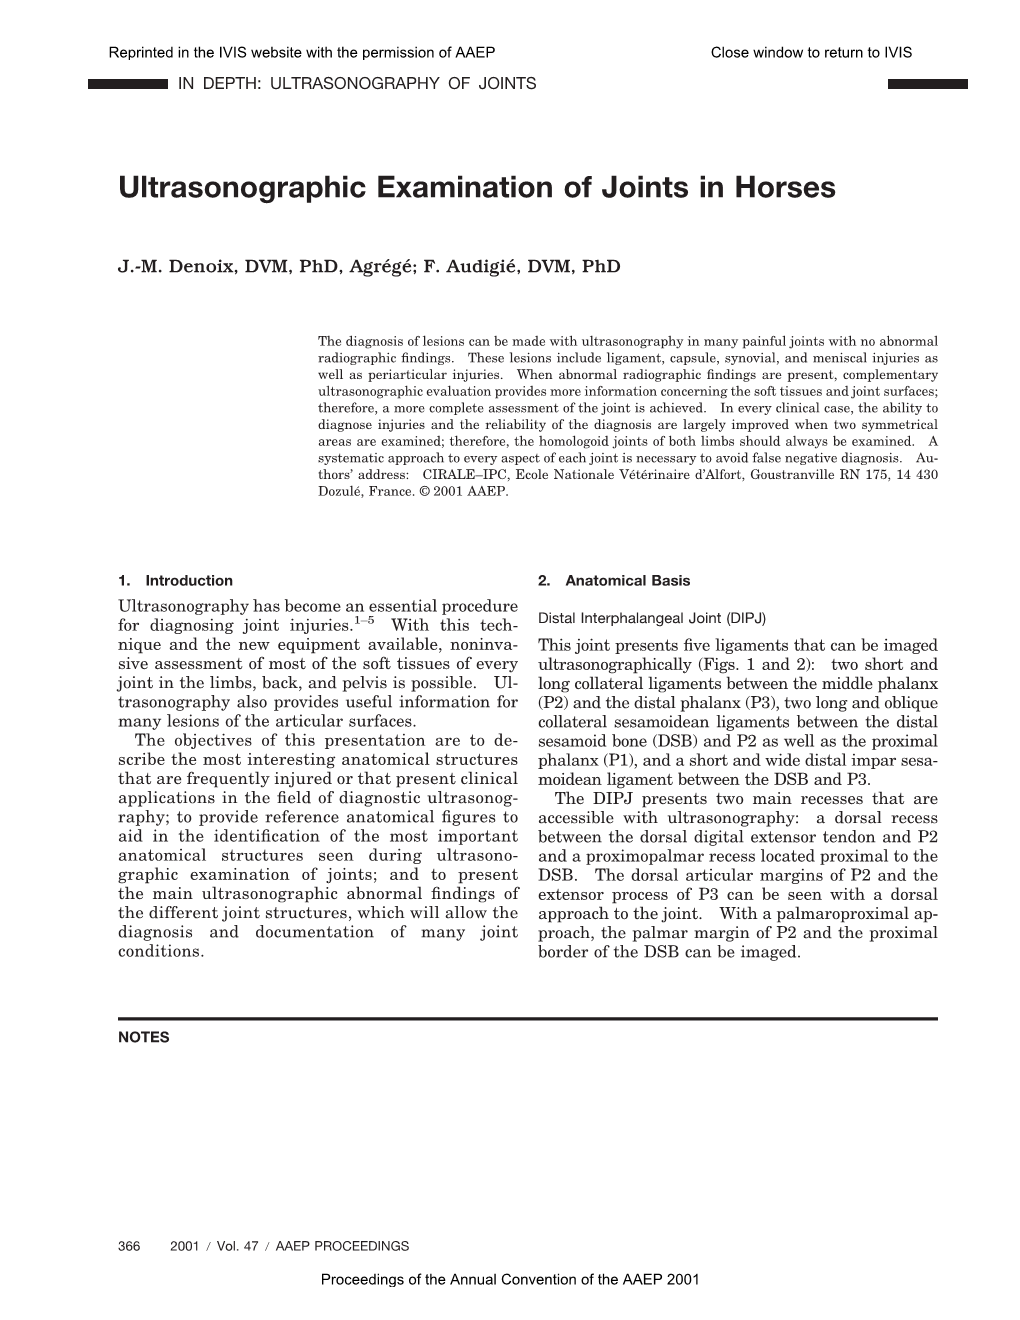 Ultrasonographic Examination of Joints in Horses